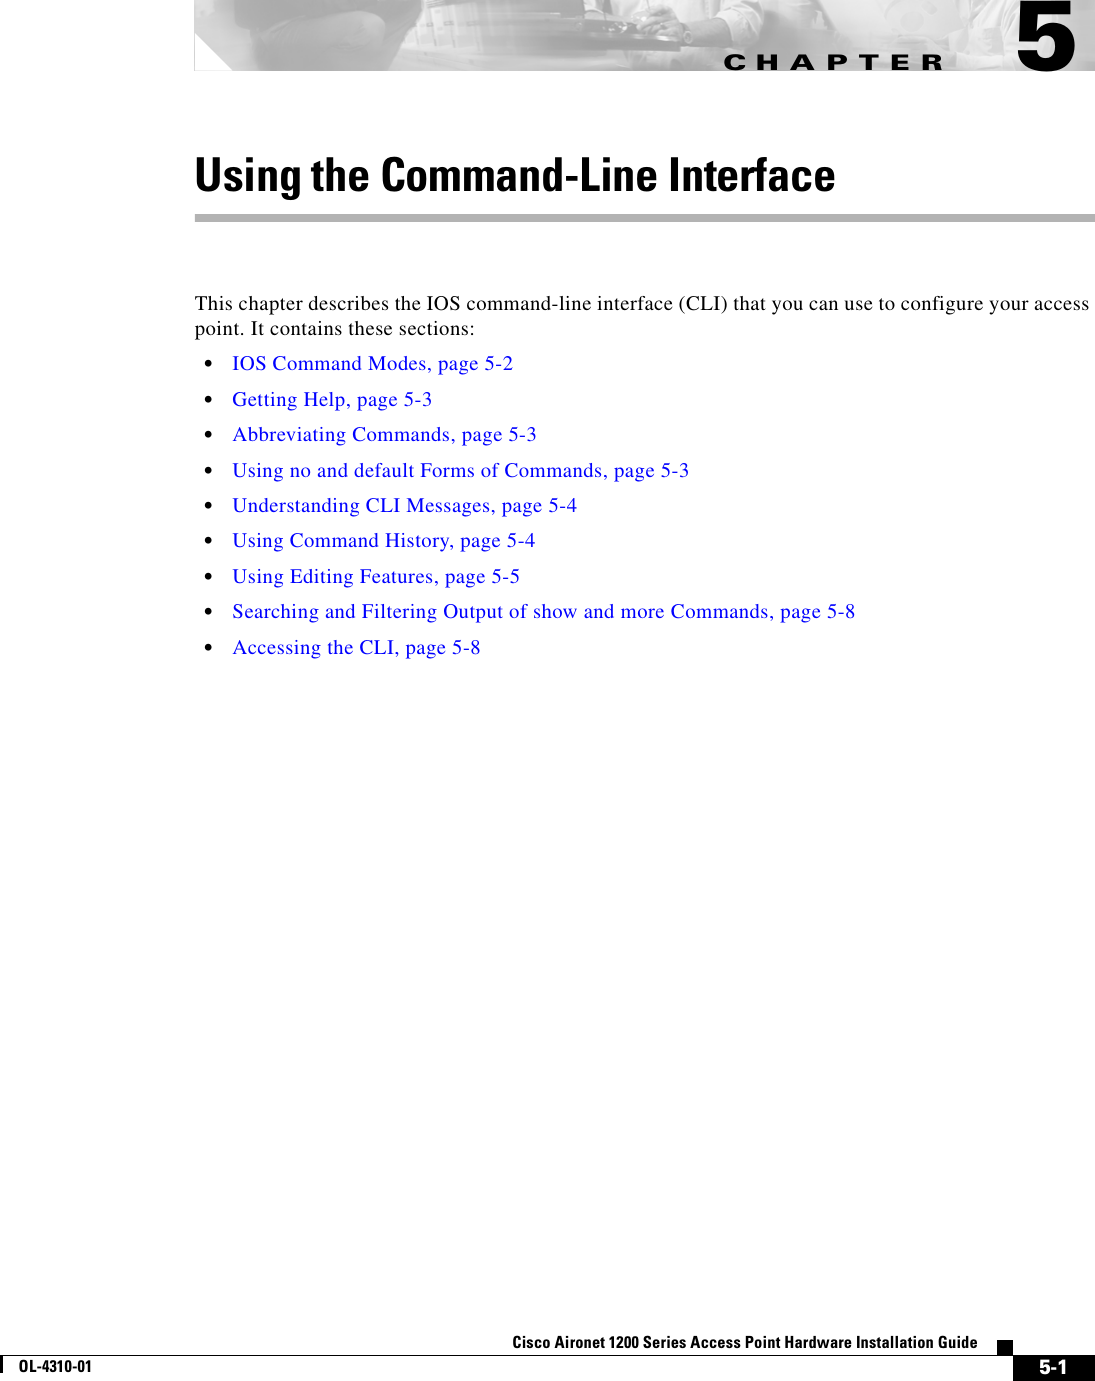 CHAPTER 5-1Cisco Aironet 1200 Series Access Point Hardware Installation GuideOL-4310-015Using the Command-Line InterfaceThis chapter describes the IOS command-line interface (CLI) that you can use to configure your access point. It contains these sections:•IOS Command Modes, page 5-2•Getting Help, page 5-3•Abbreviating Commands, page 5-3•Using no and default Forms of Commands, page 5-3•Understanding CLI Messages, page 5-4•Using Command History, page 5-4•Using Editing Features, page 5-5•Searching and Filtering Output of show and more Commands, page 5-8•Accessing the CLI, page 5-8